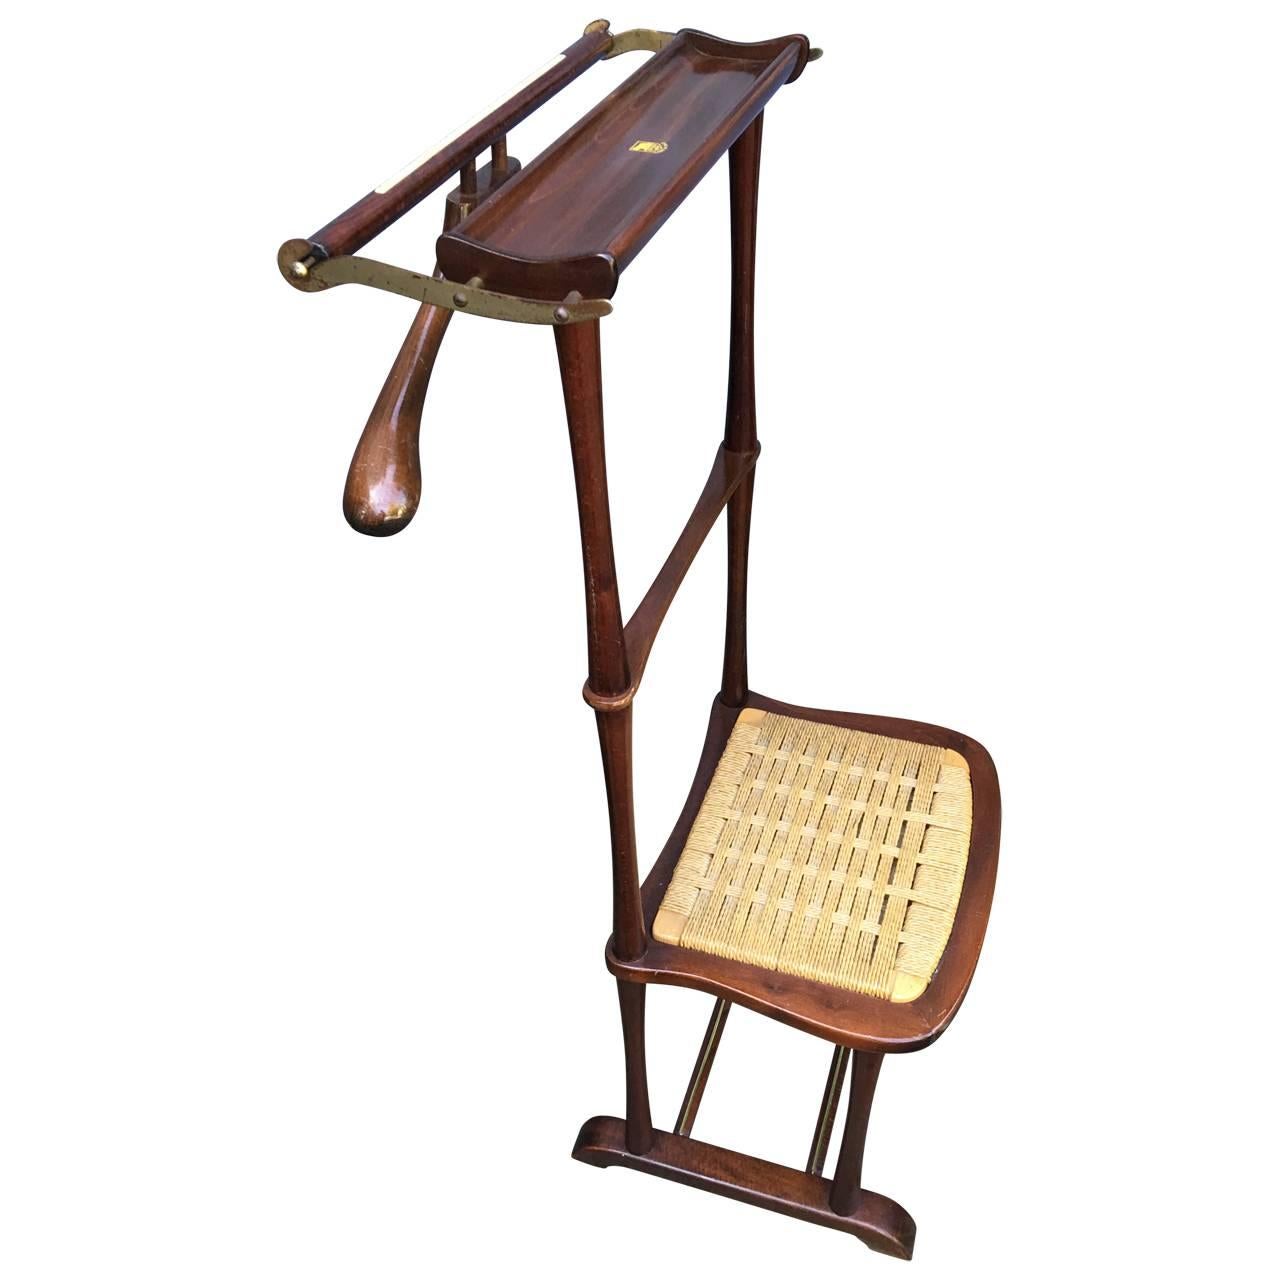 Rare wooden Italian valet with detachable hanger for shirt and pants.
Signed Made In Italy, by SPQR.

Complimentary Fathers Day (2016) Express delivery, as long as possible.